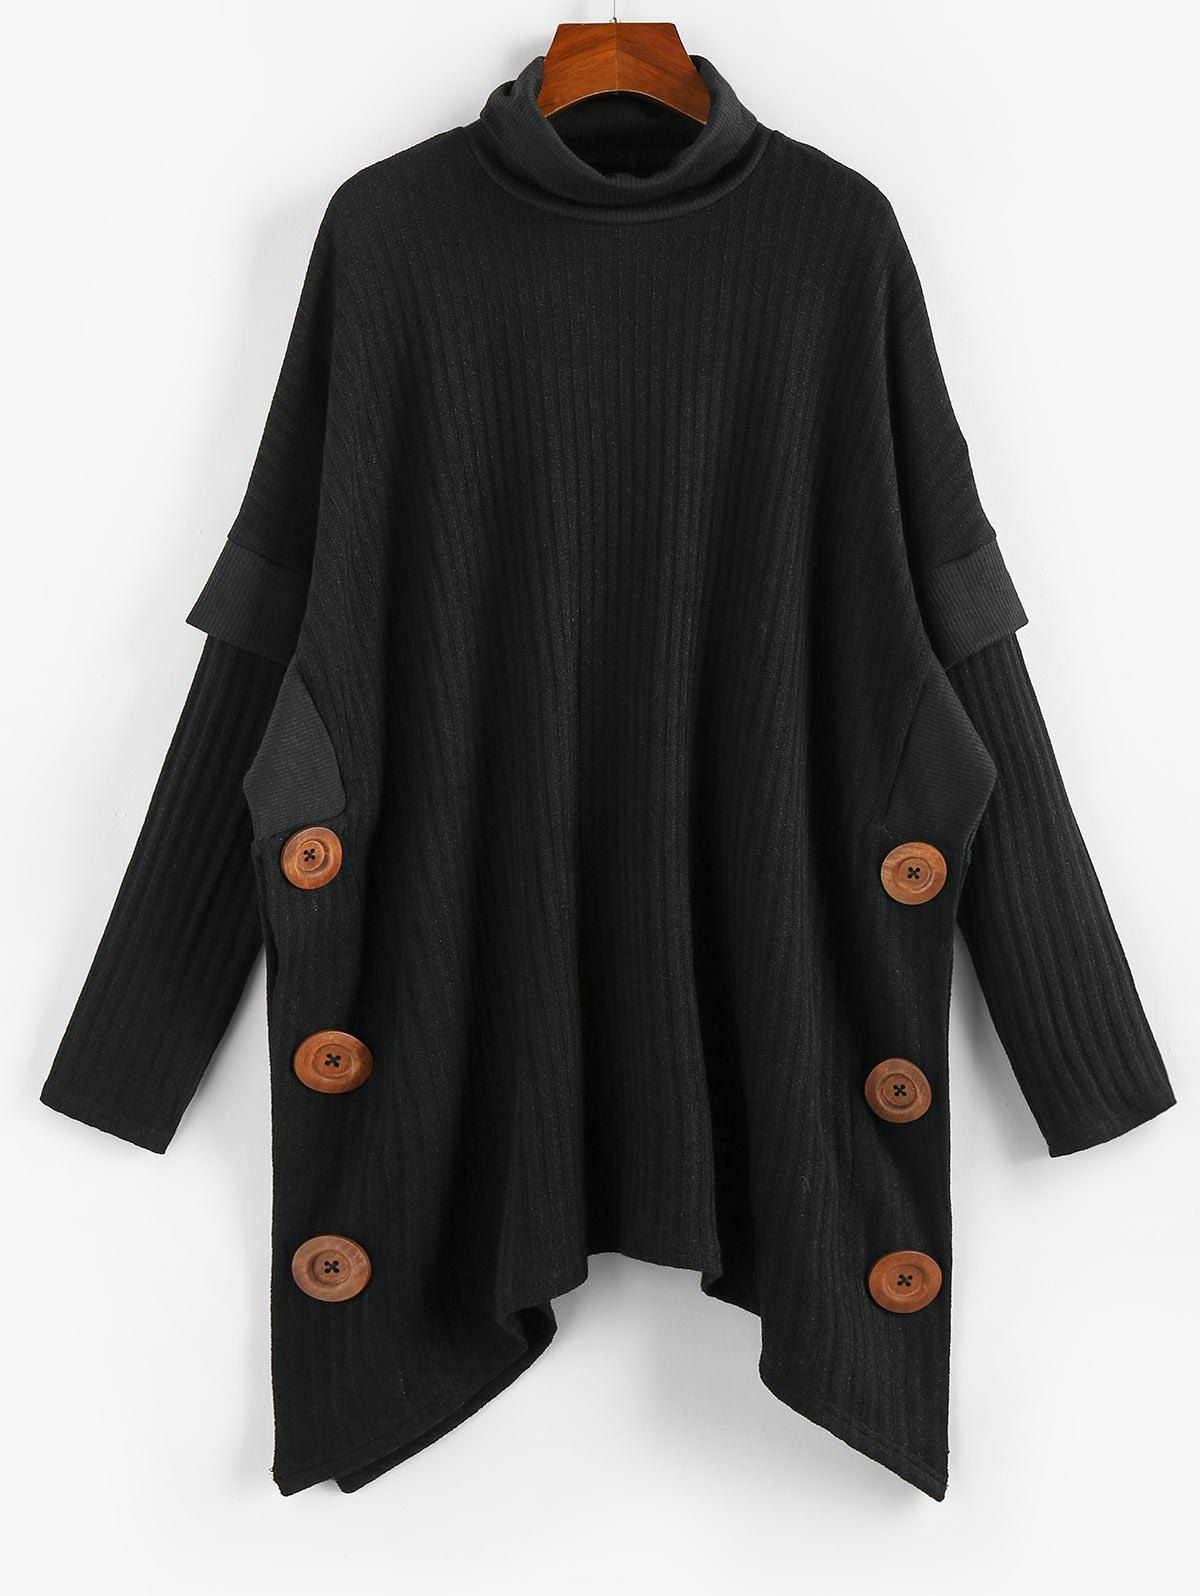 Mock Button Ribbed Cape Sweater - BLACK 3XL